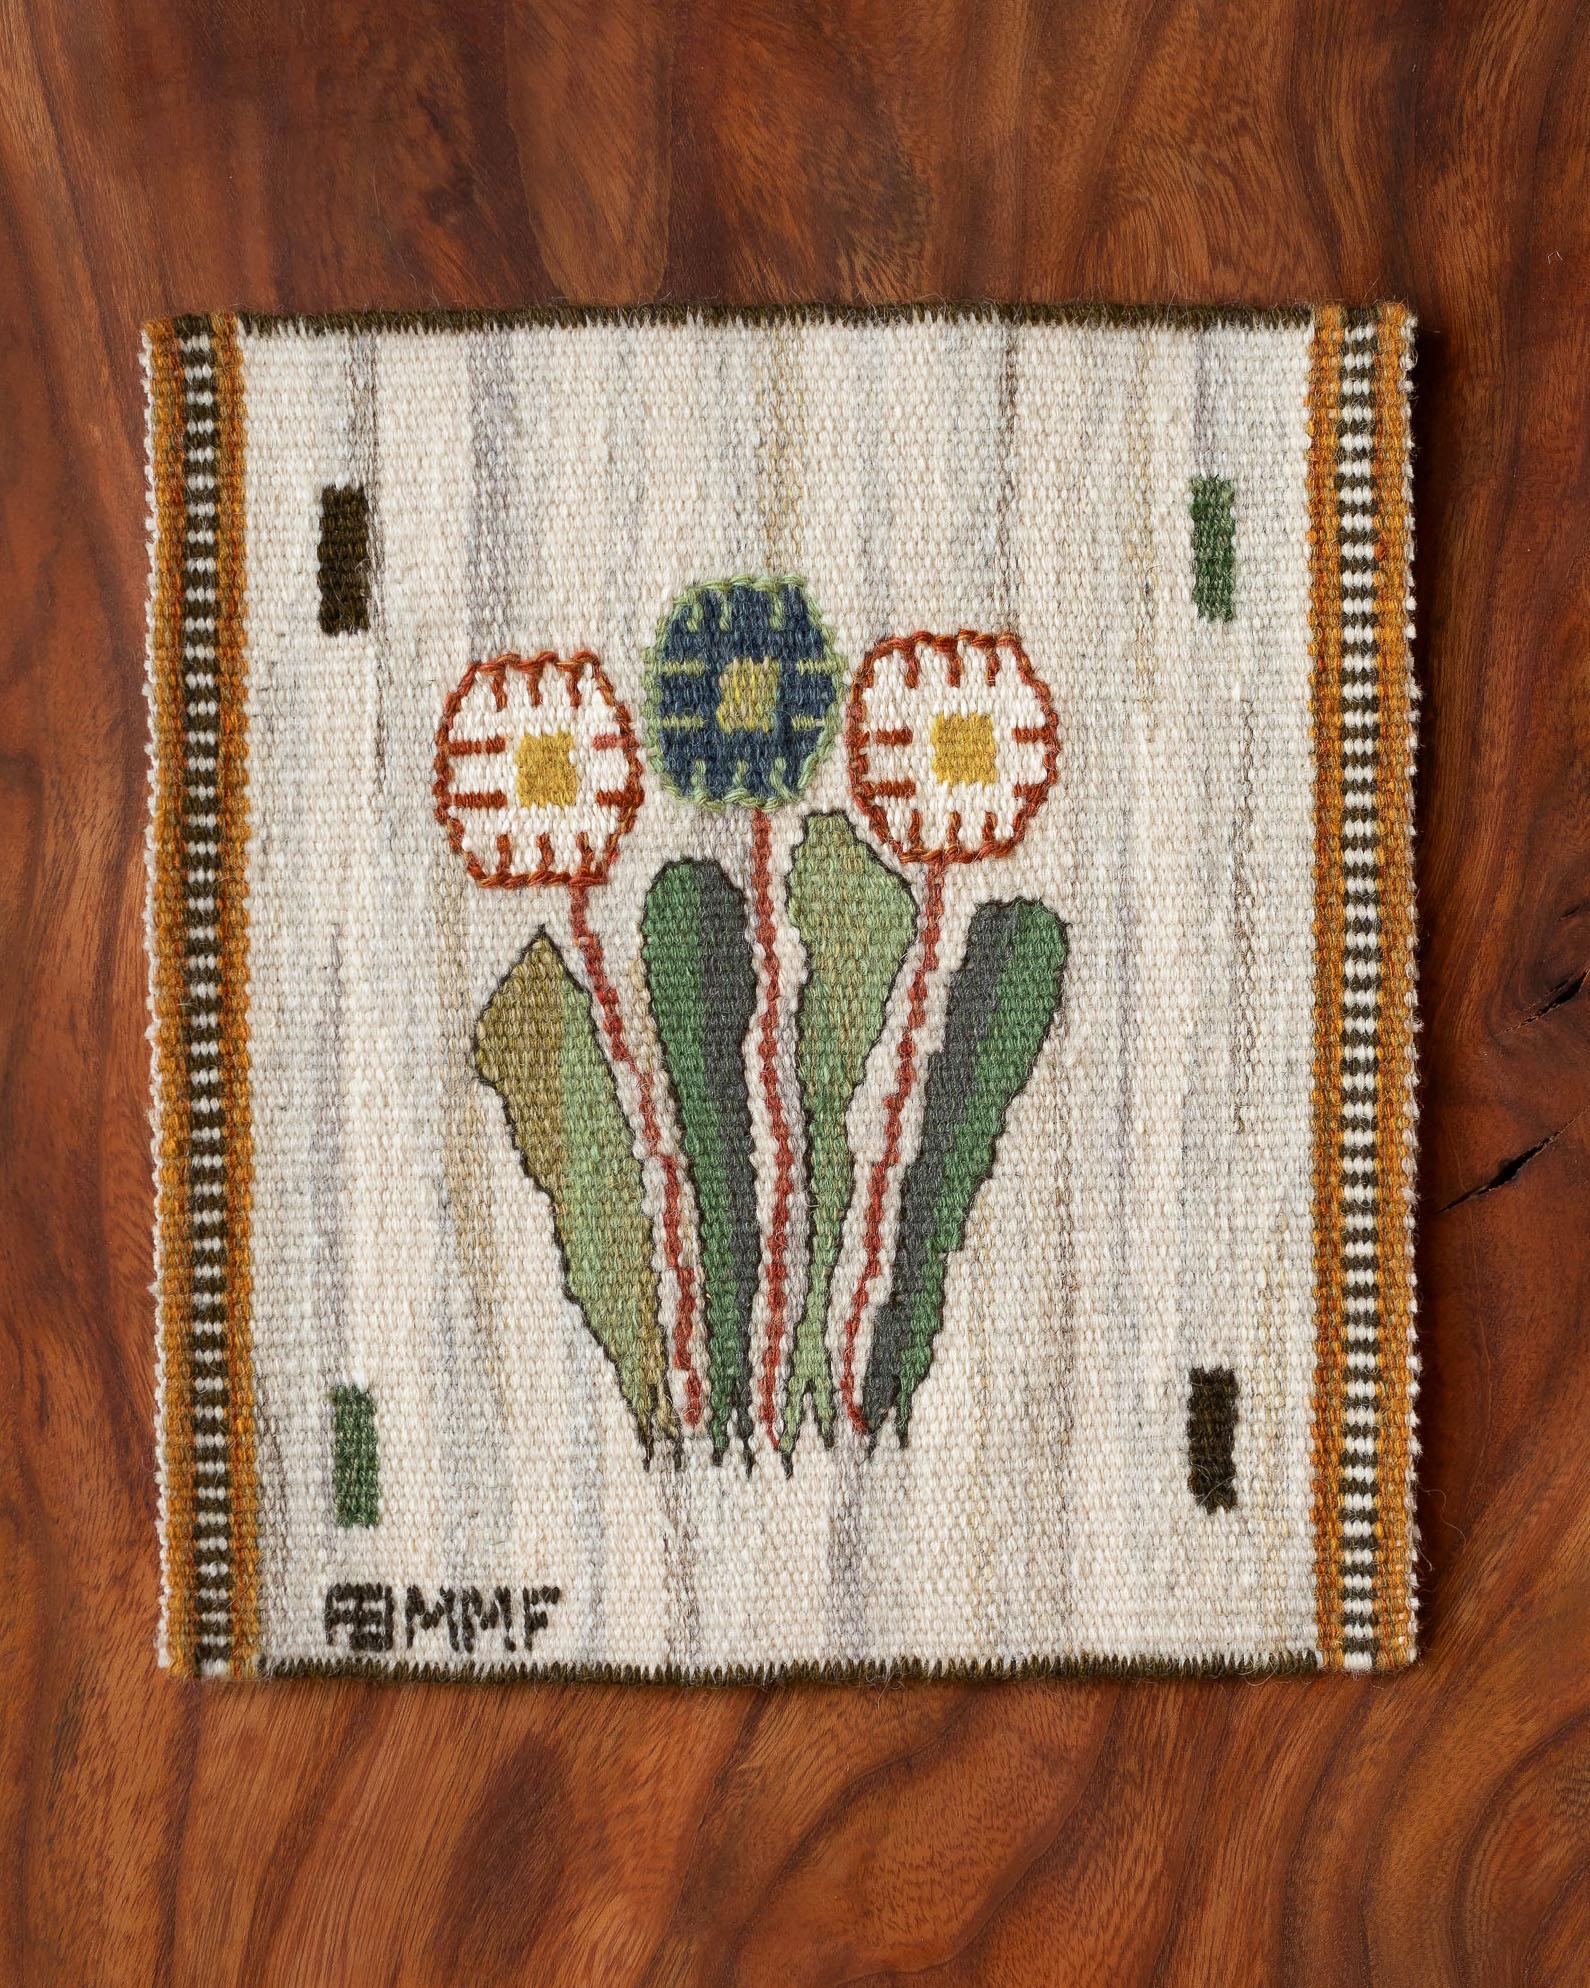 Handwoven tapestry with daisies, designed by Märta Måås-Fjetterström in 1939. 

Woven in wool on a wool warp and at the Märta Måås-Fjetterström studio in Båstad, Sweden. 

The tapestry can be framed, mounted as a decorative pillow, or used on a